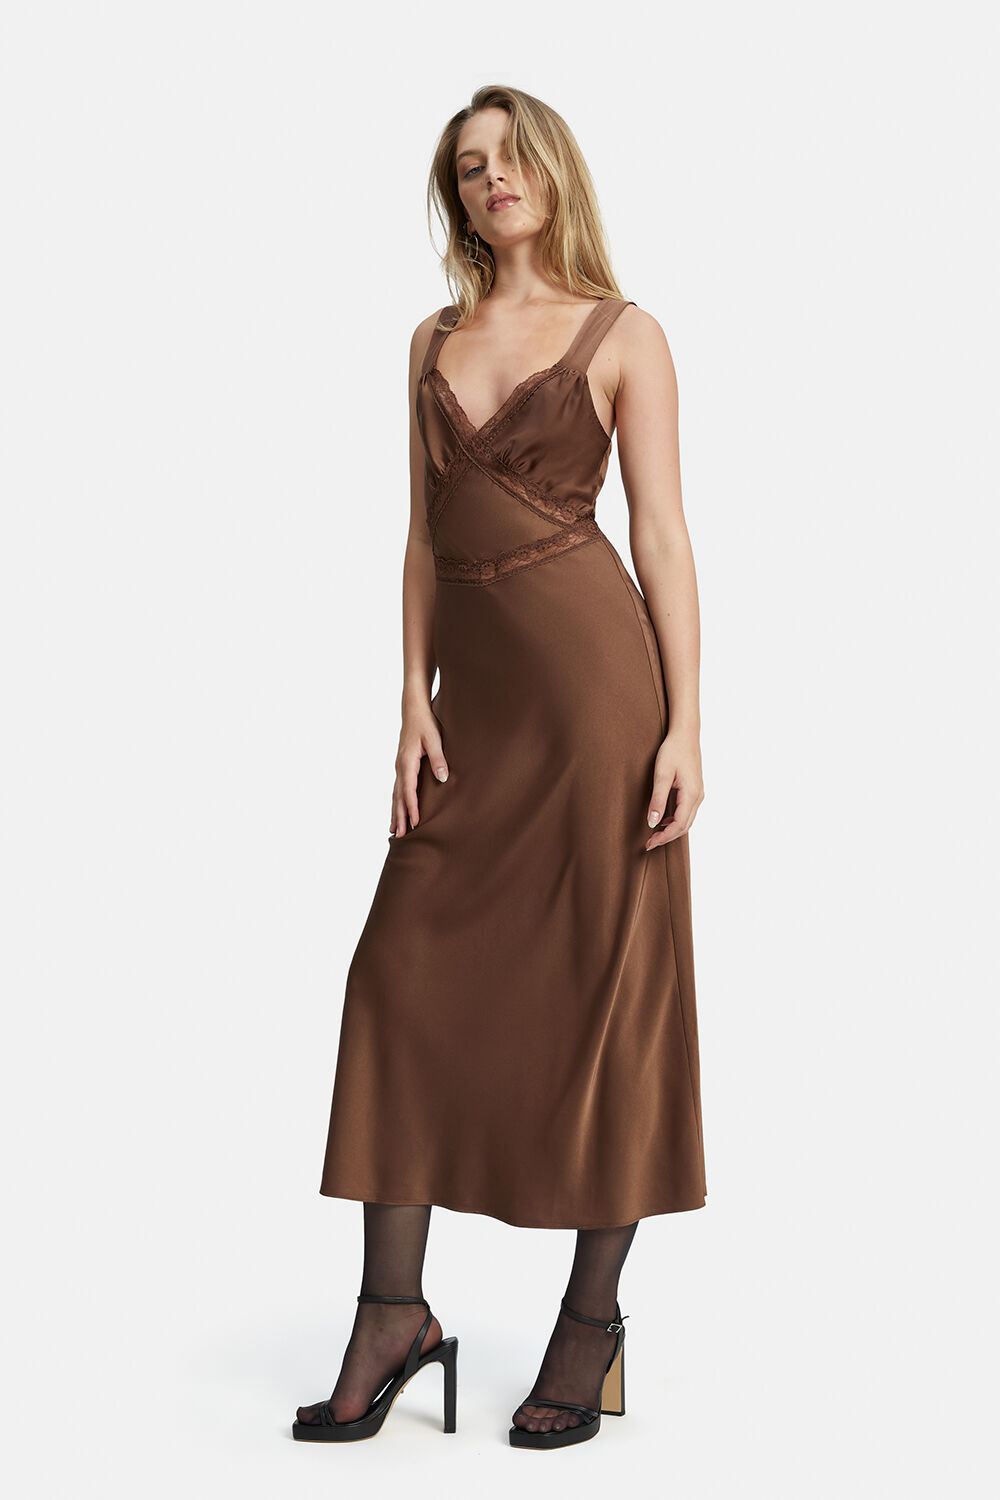 EMORY LACE SLIP DRESS in colour CHOCOLATE BROWN